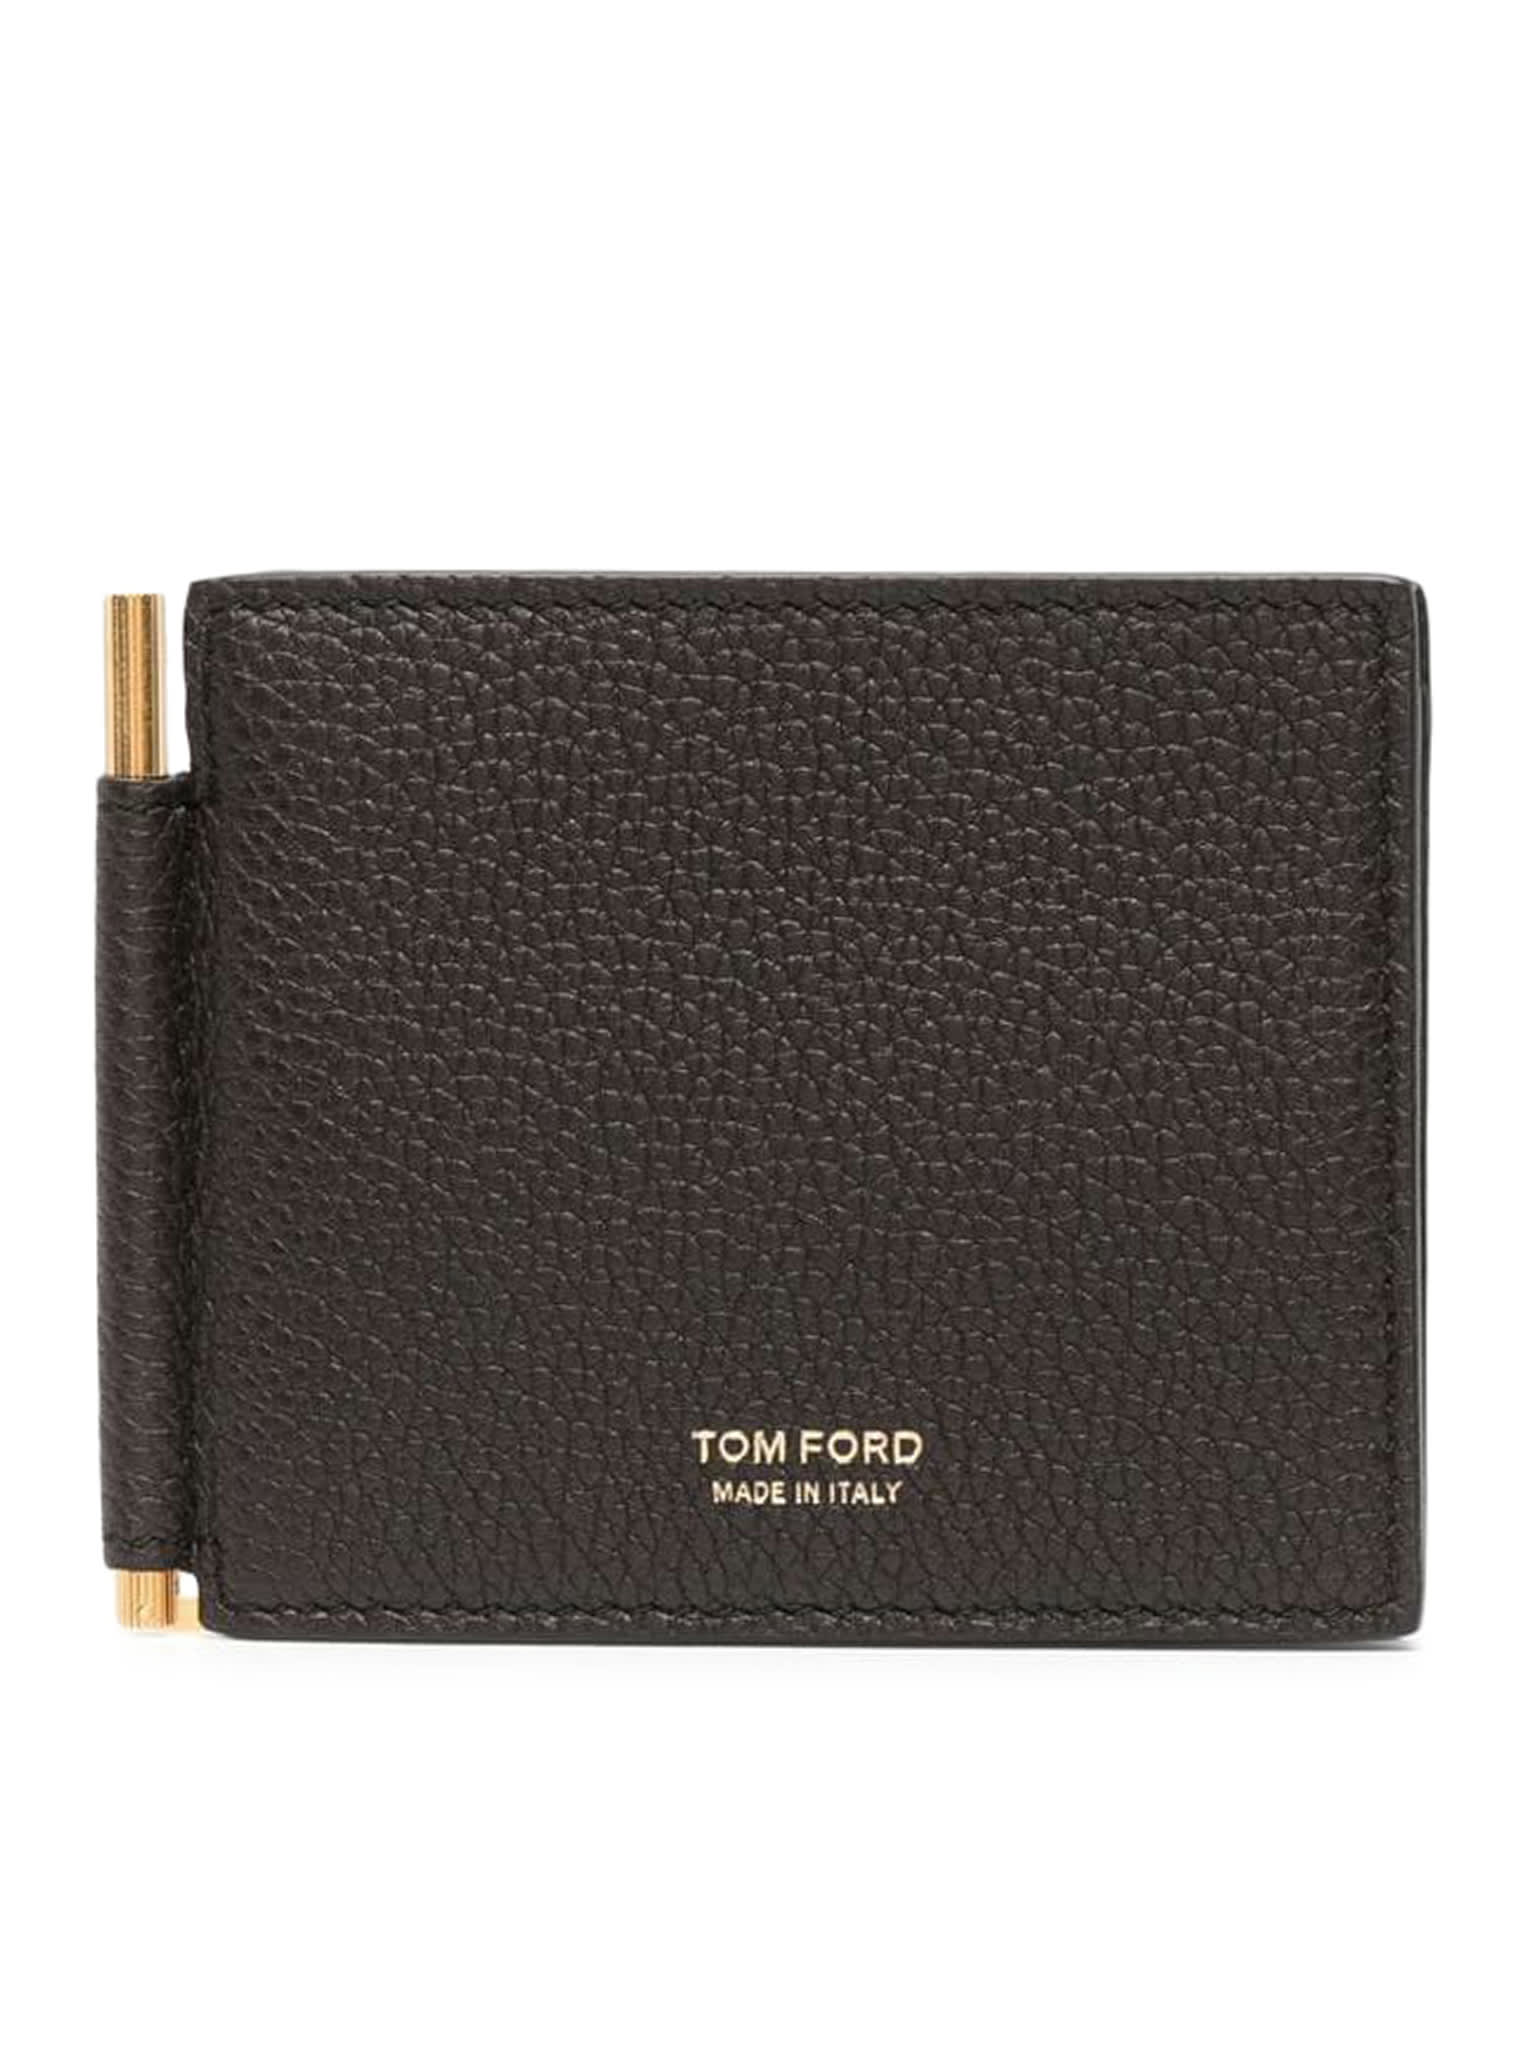 TOM FORD SOFT GRAIN LEATHER T LINE MONEY CLIP WALLET